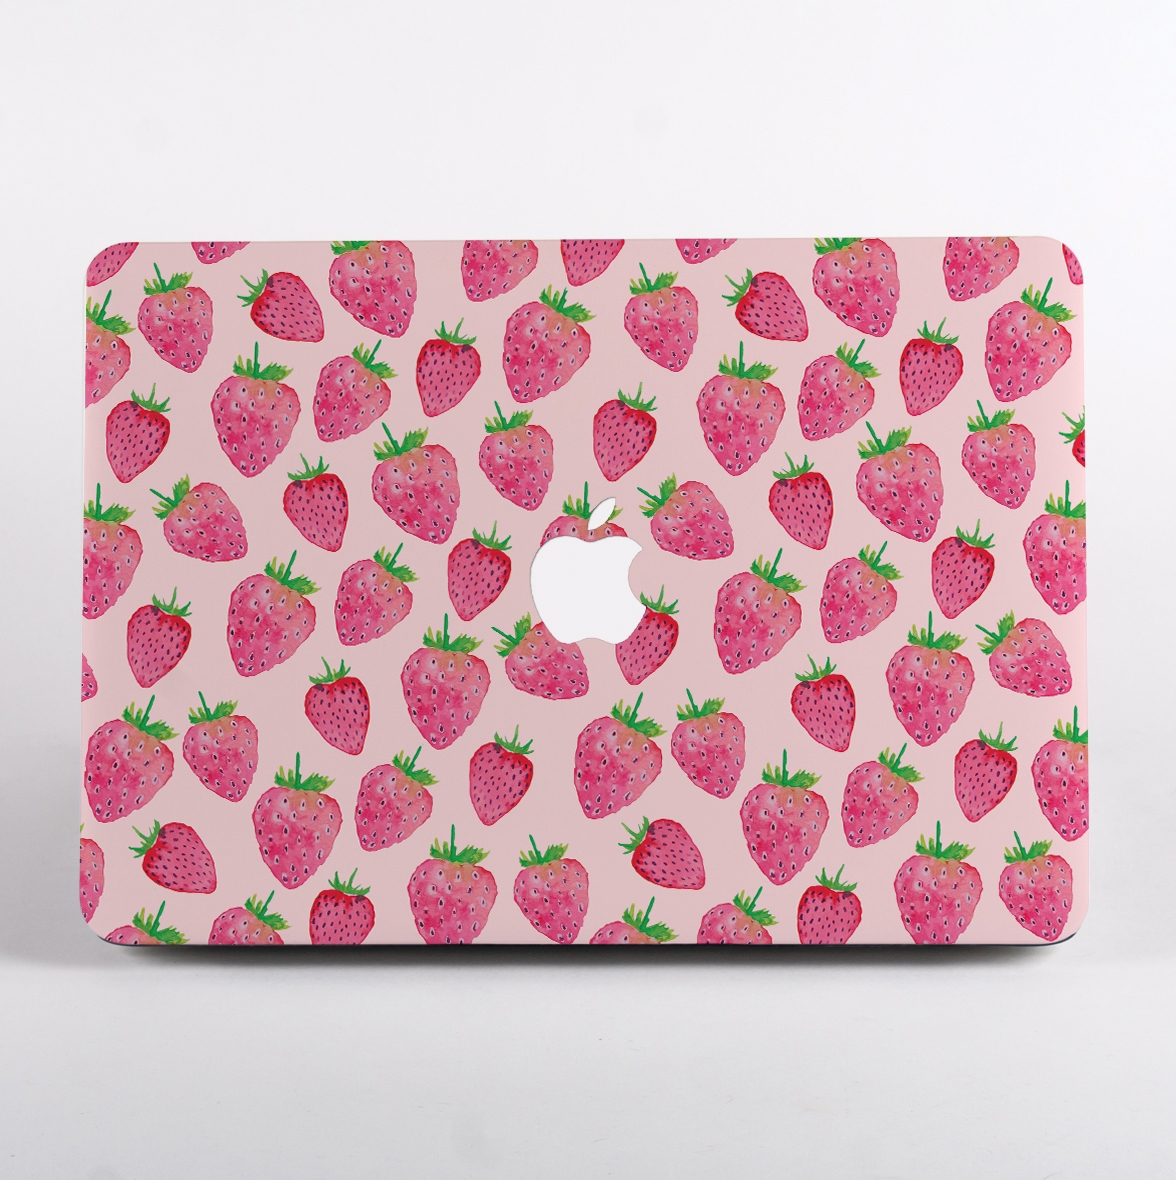 13inch MacBook Pro Case Summer Fruit Cherry Blueberry Drink Plastic Hard Shell Compatible Mac Air 11 Pro 13 15 13 Inch MacBook Case Protection for MacBook 2016-2019 Version 